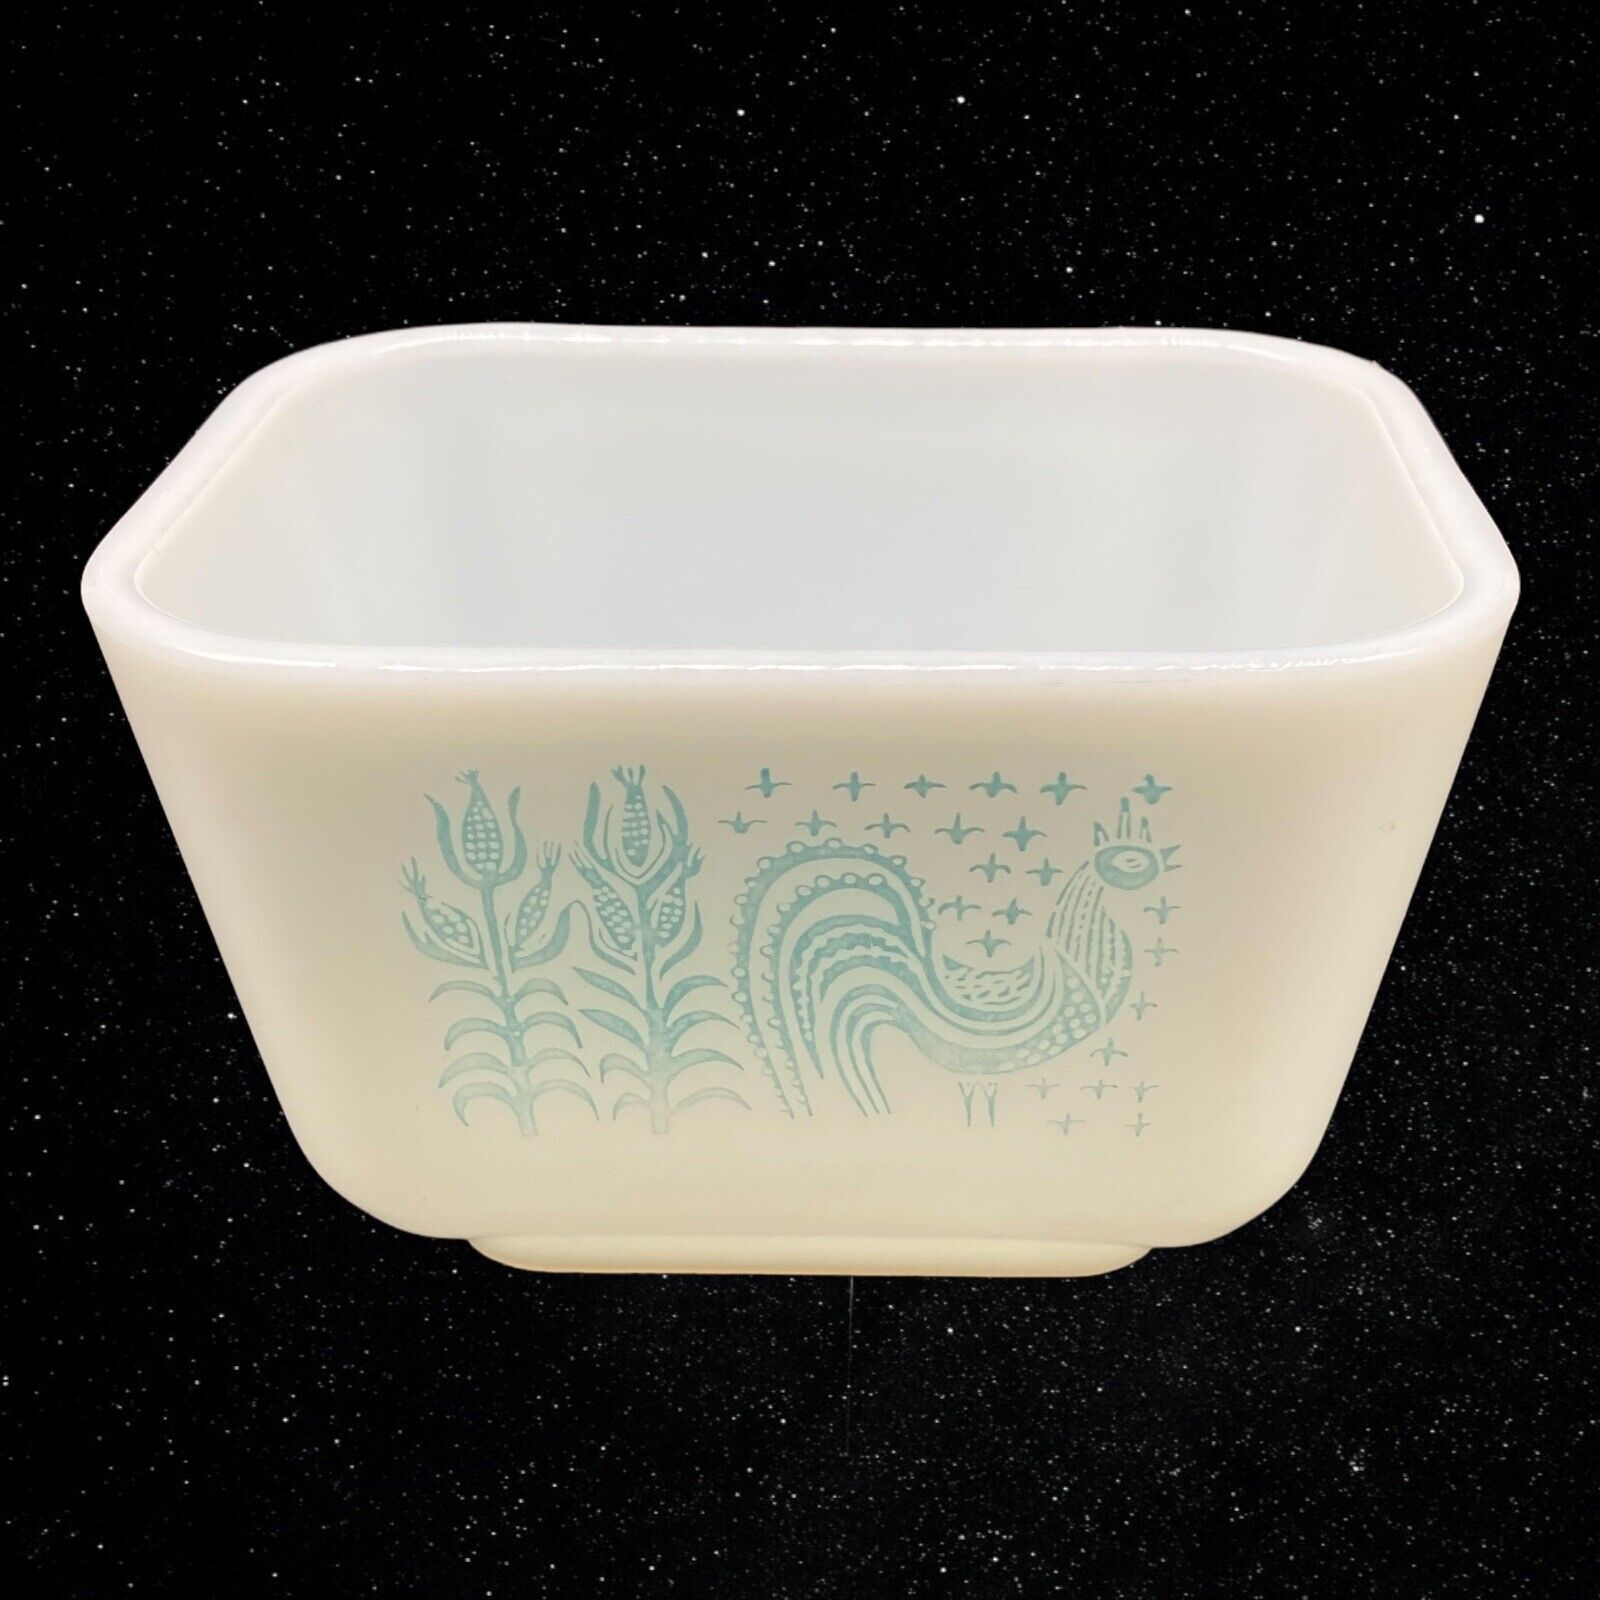 1960s Pyrex Turquoise Amish Butterprint Rooster Refrigerator Dish 2”T 4.25”W